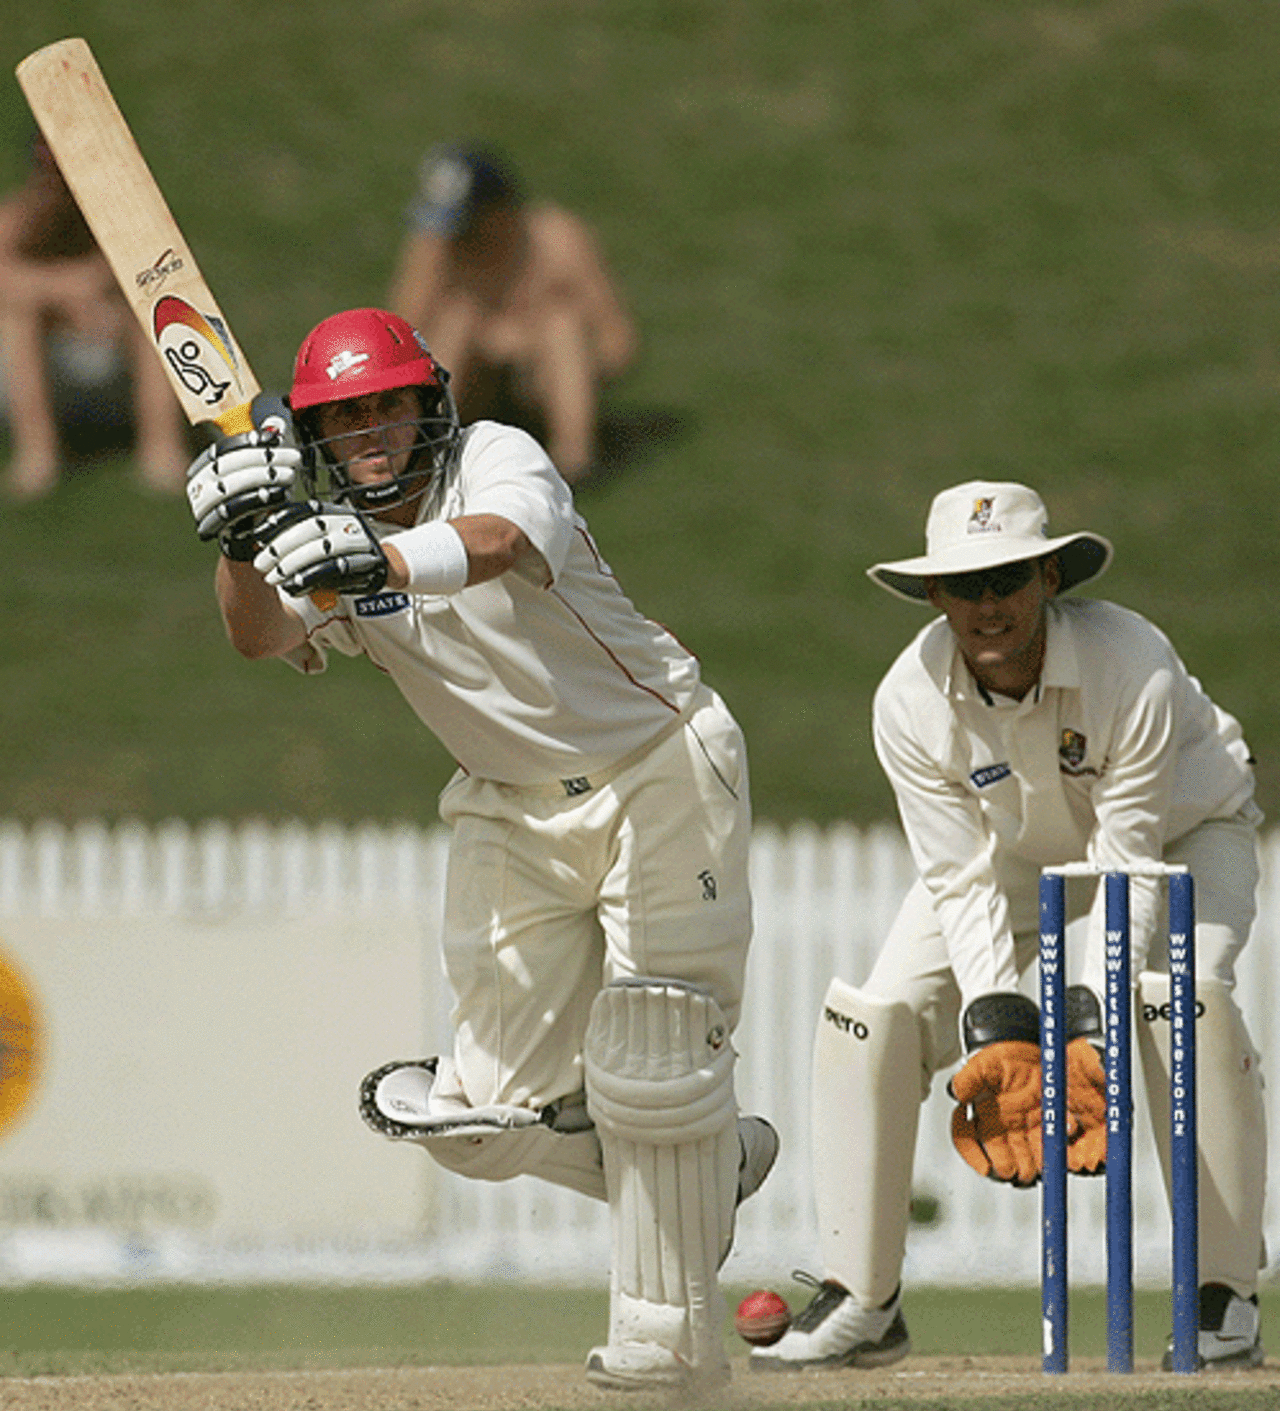 Canterbury's Michael Papps followed up his first-innings 132 with 96 in the second innings, State Championship final, Northern Districts v Canterbury, Hamilton, March 25, 2007